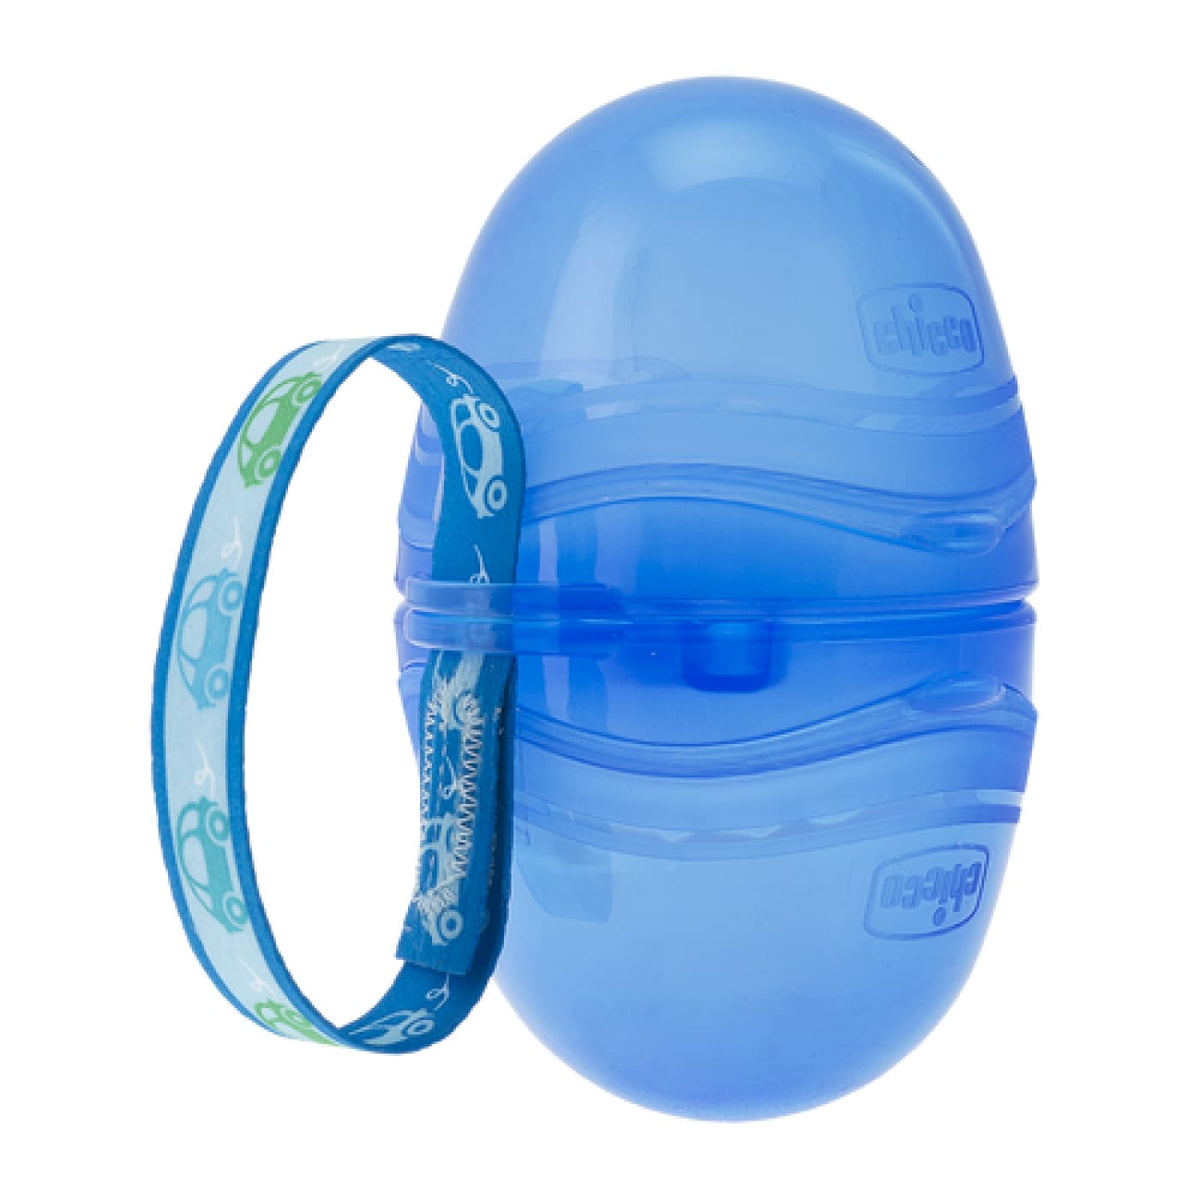 Chicco Double Soother Holder - Blue - NURSING &amp; FEEDING - DUMMIES/SOOTHERS/CLIPS